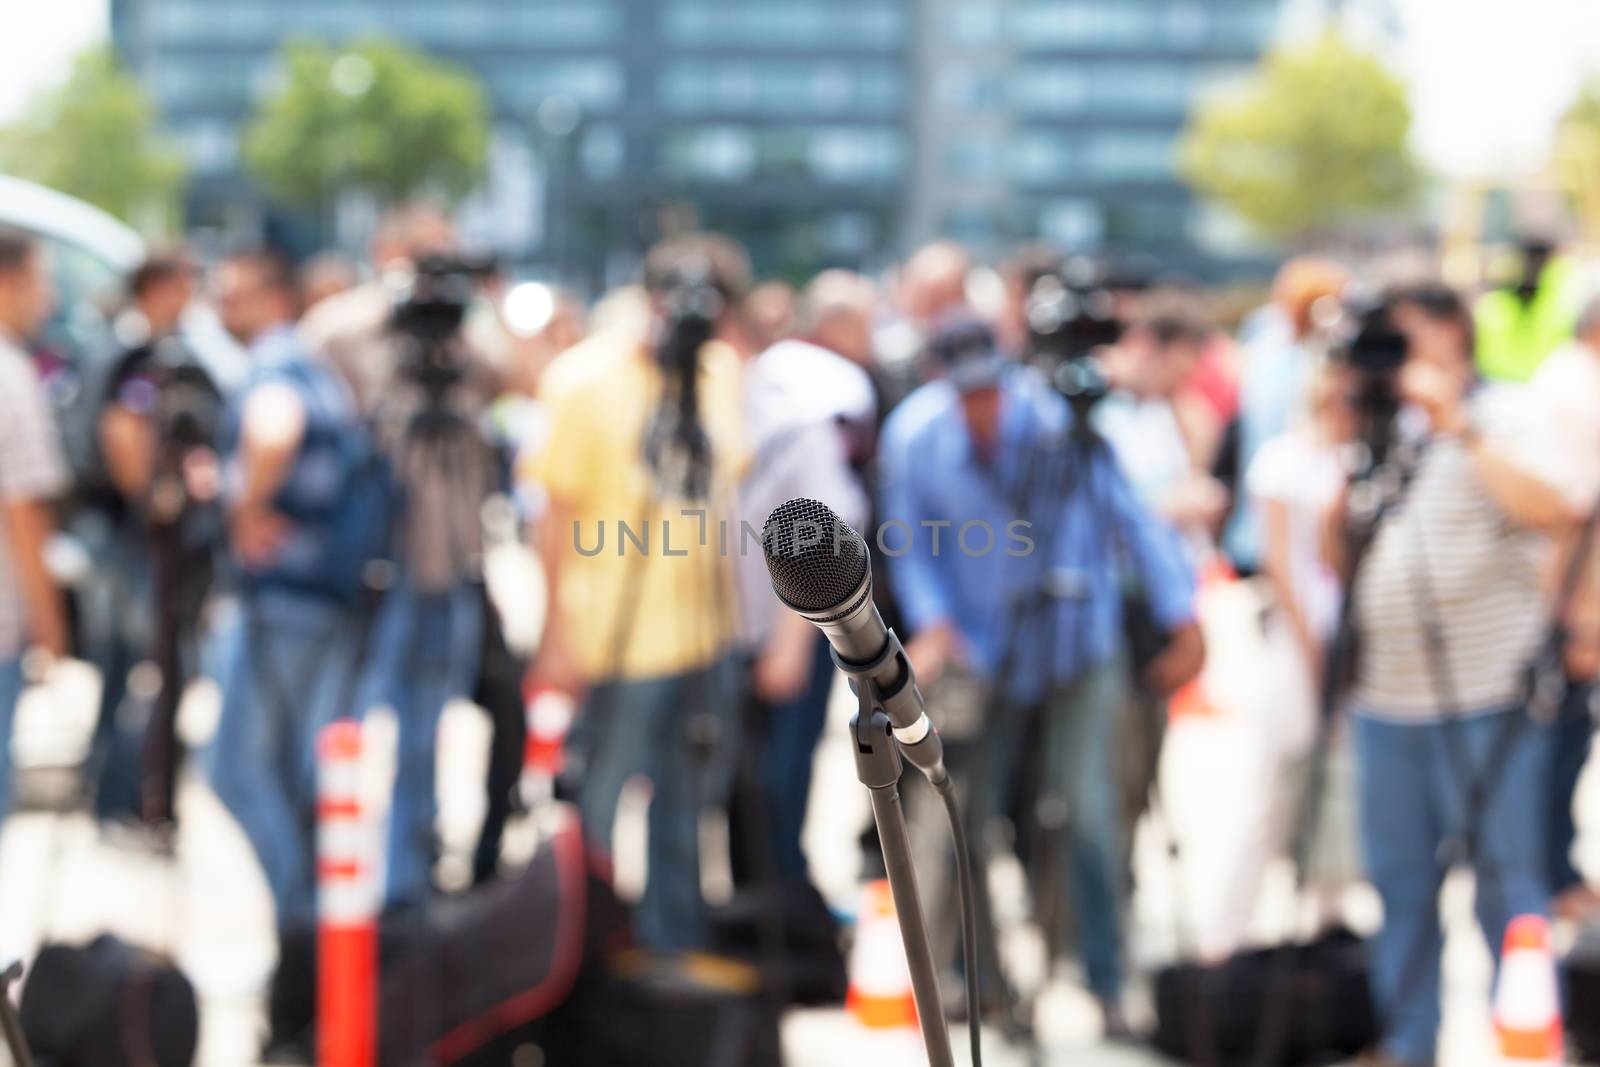 News conference. Microphone in focus against blurred background.